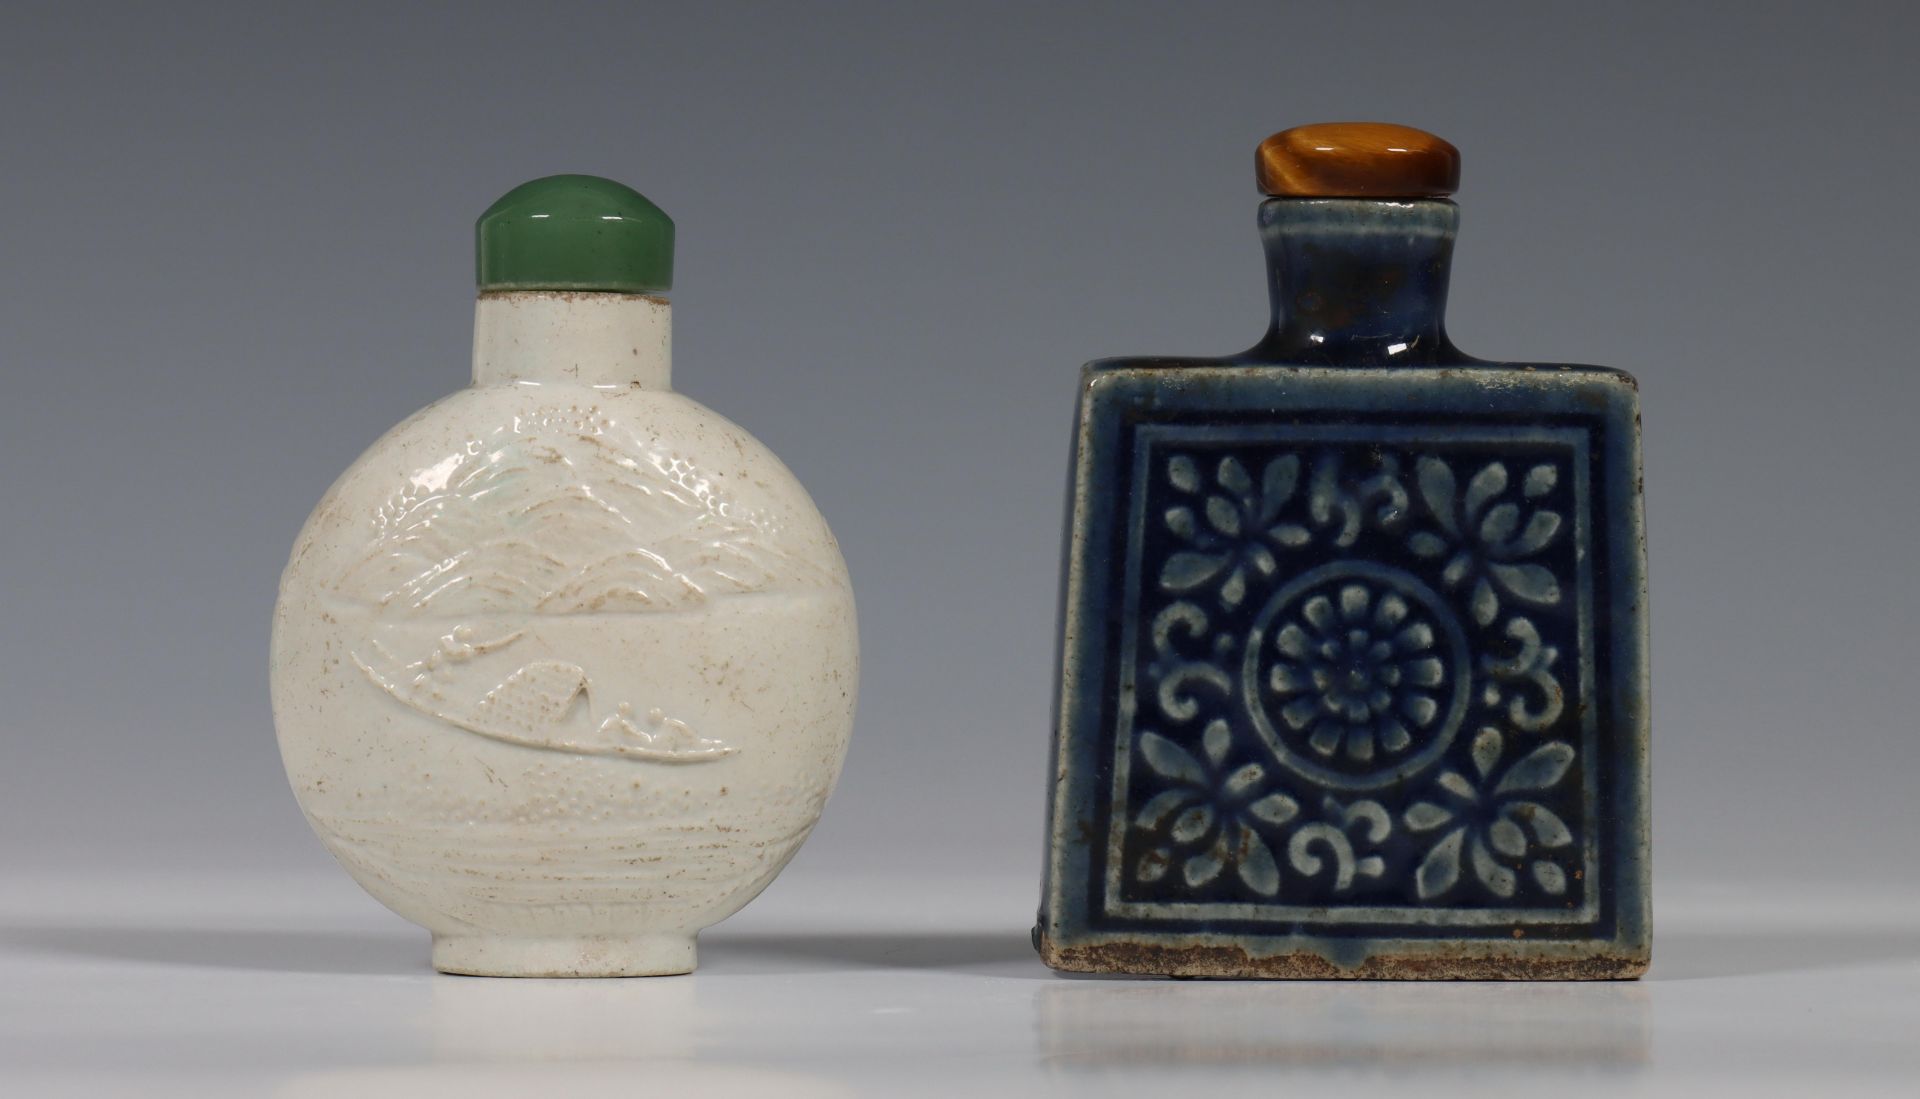 China, two porcelain snuff bottles, 20th century, one rounded bottle in biscuit and moulded with a - Image 2 of 2